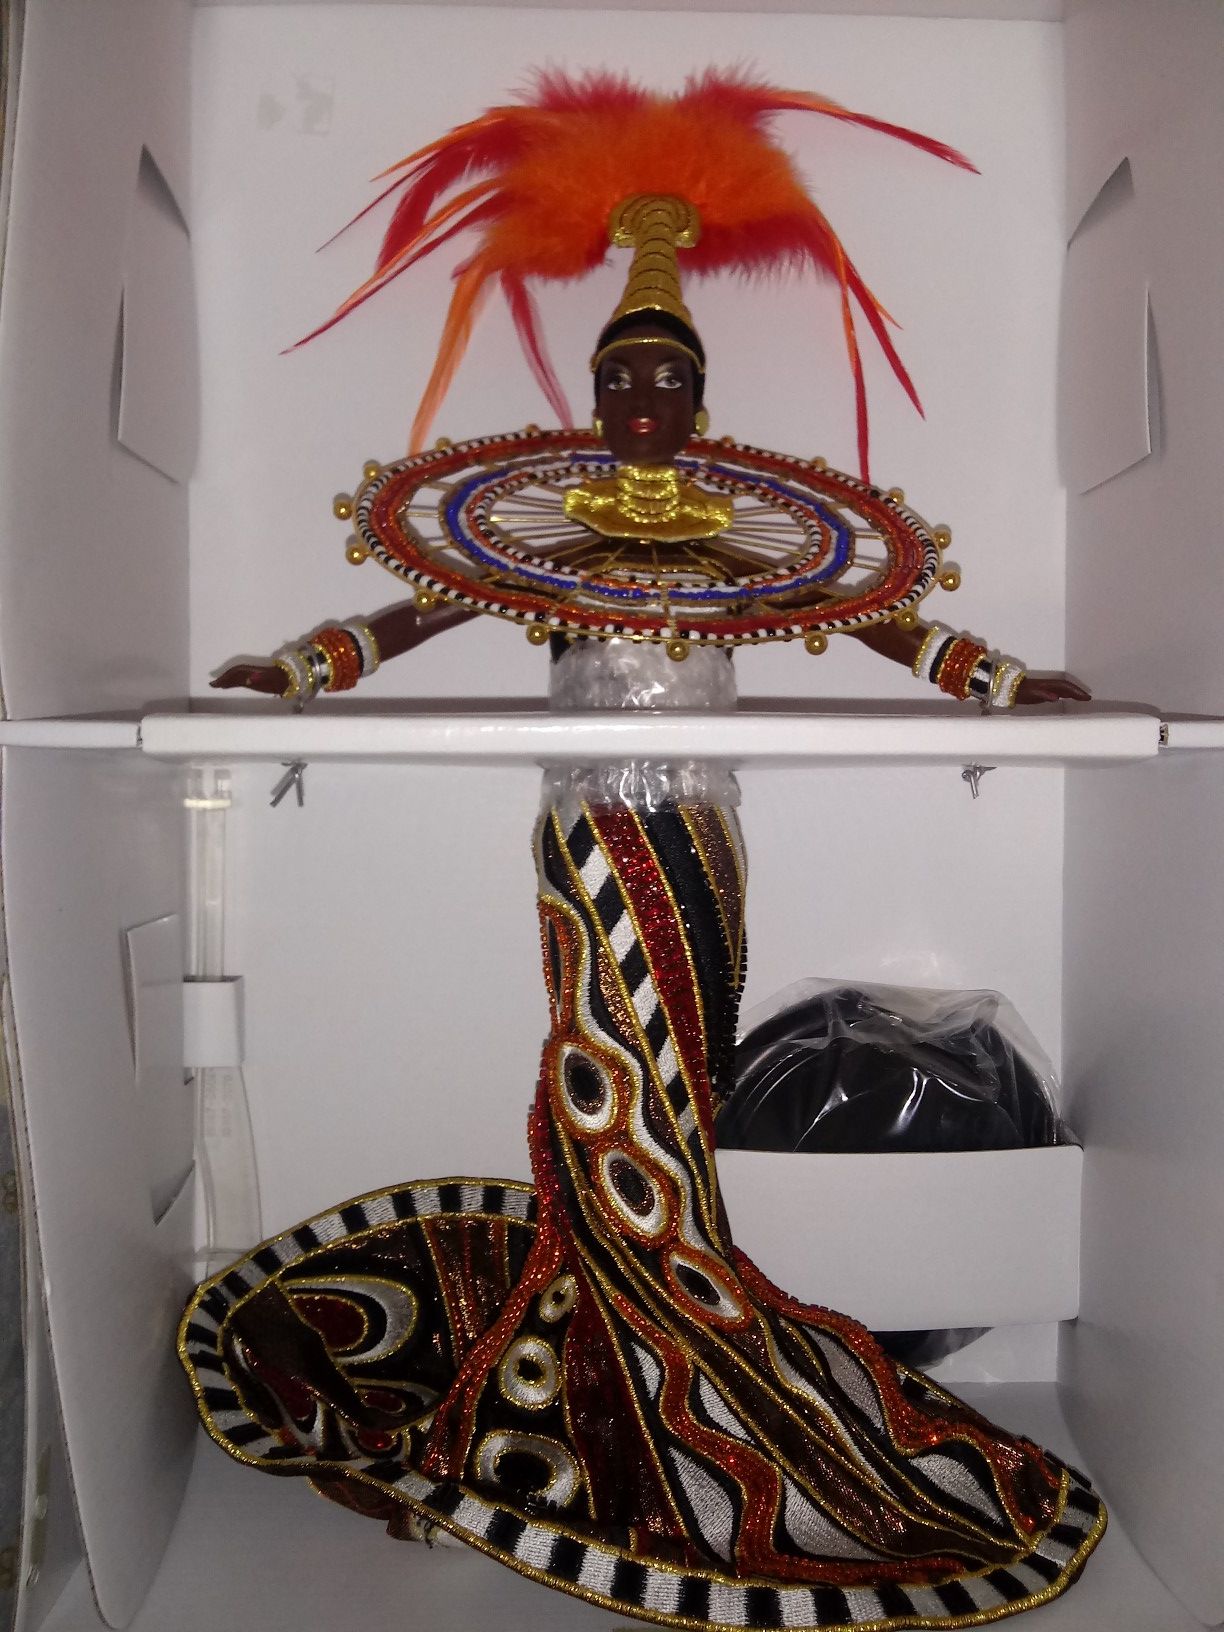 Authentic Mattel fantasy goddess of Africa Barbie never used. Original packaging. Cert of authenticity collectable